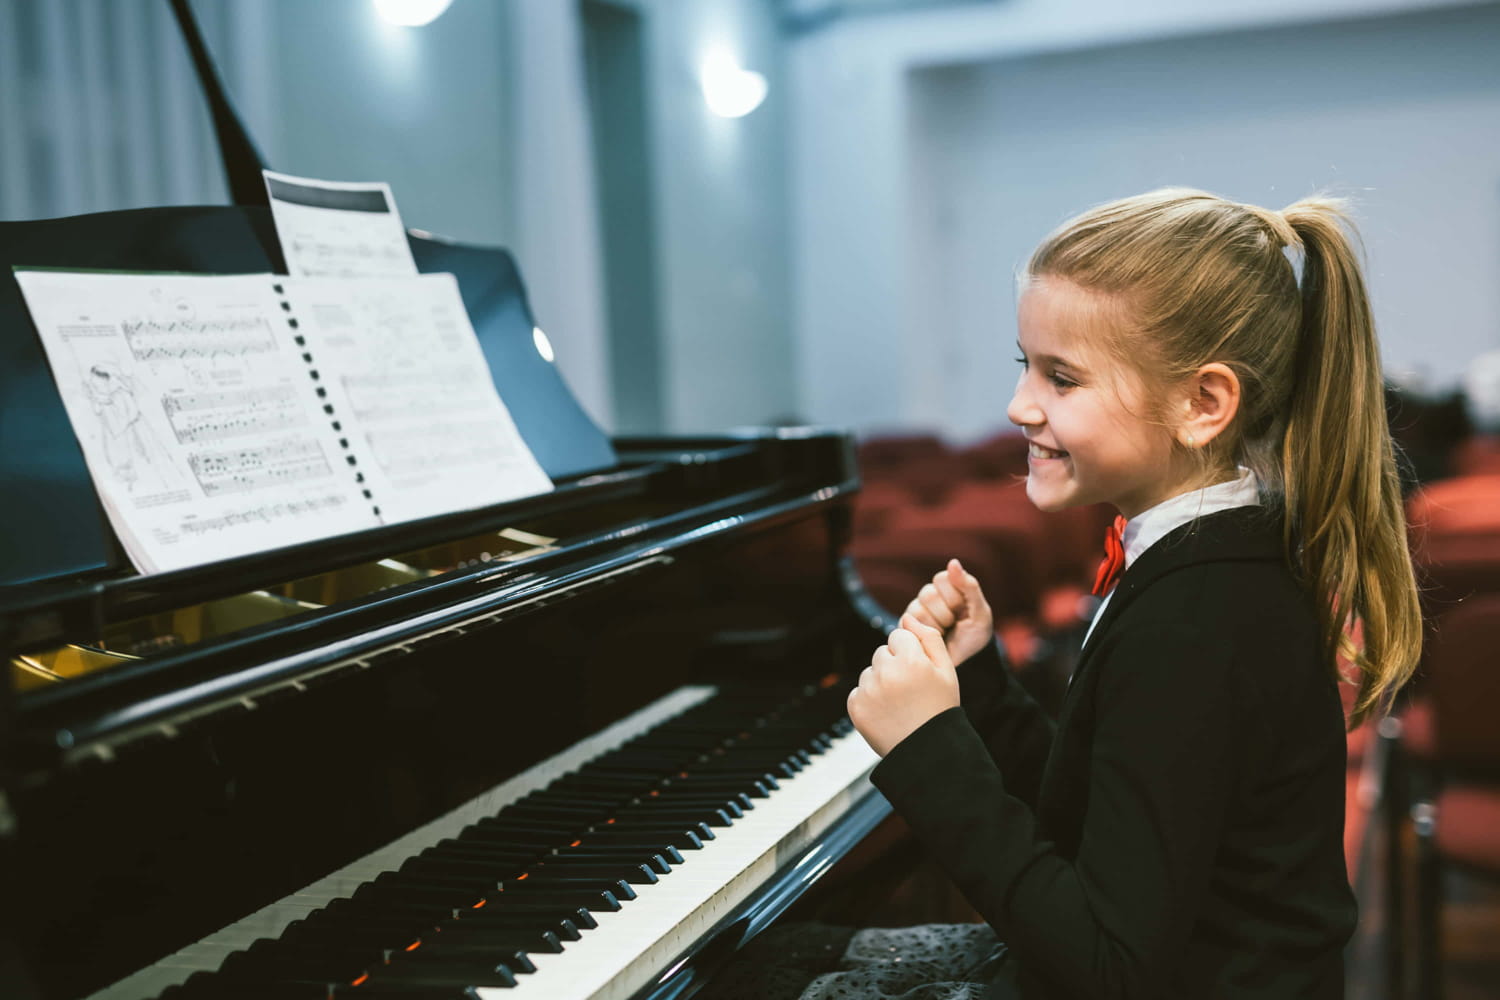 Young girl smiling after completing playing a song on the piano